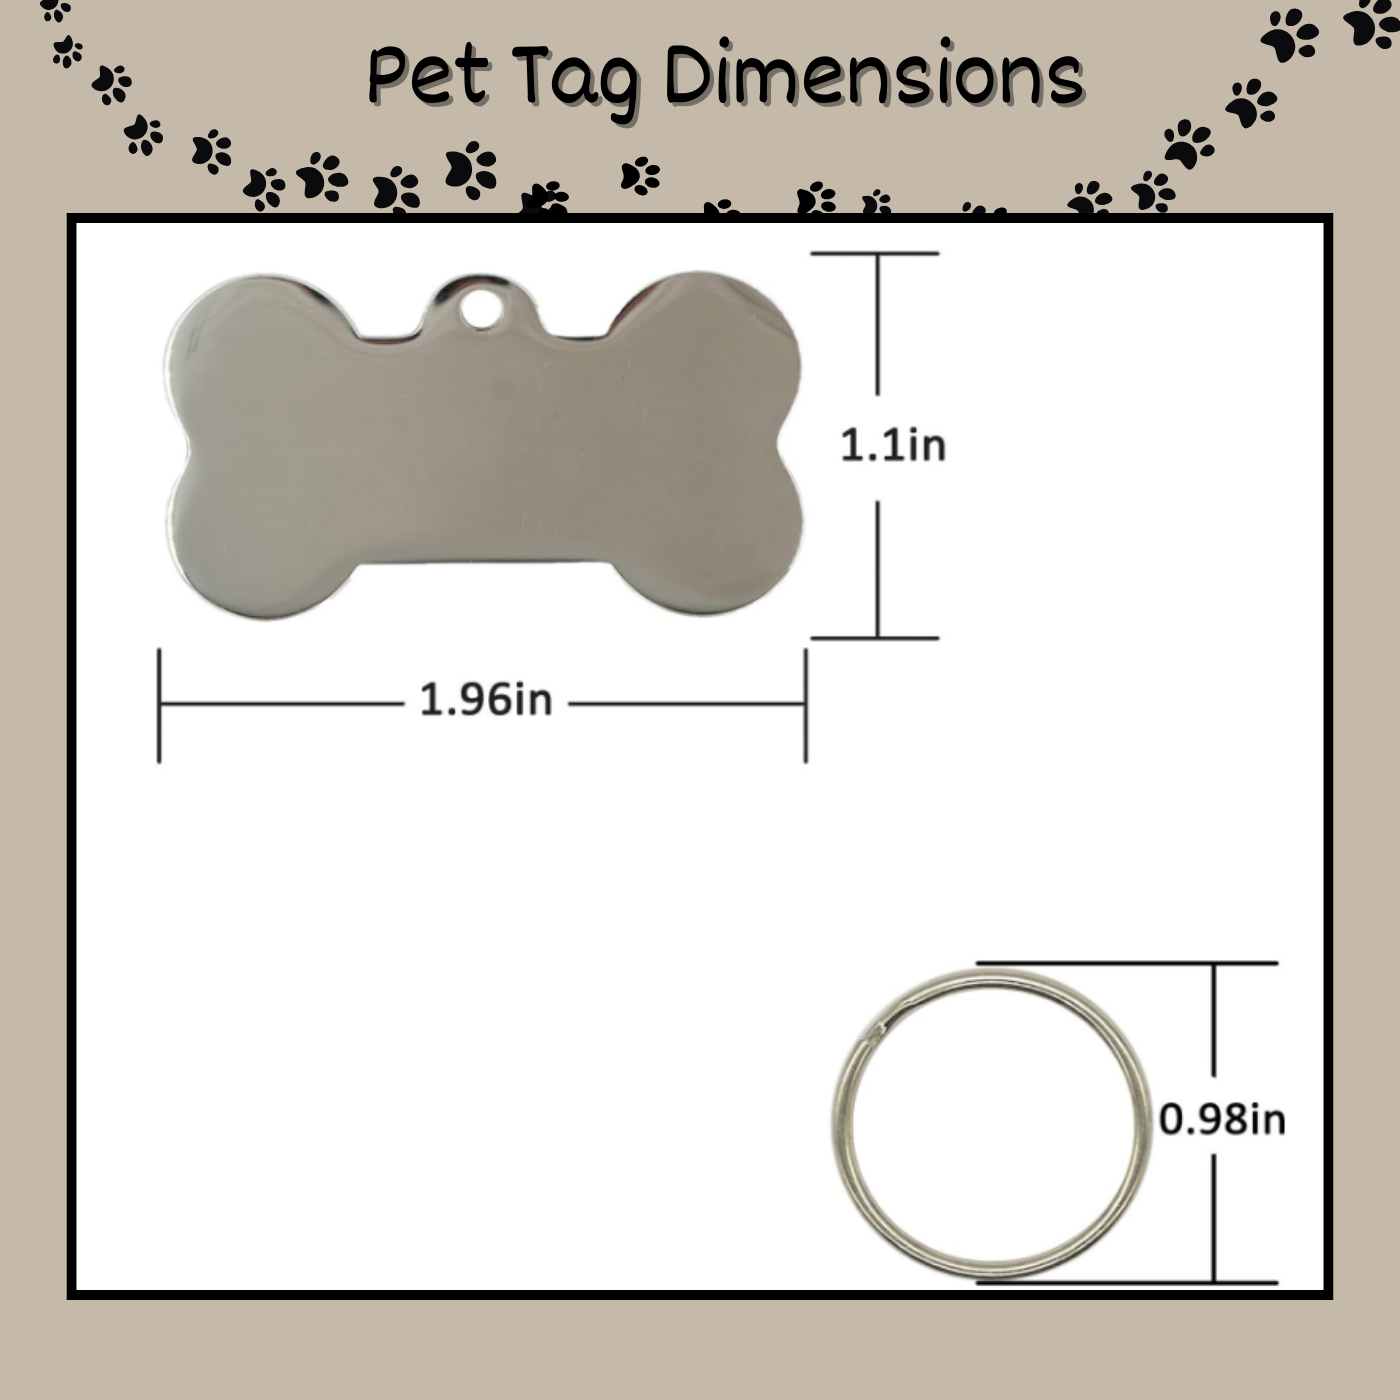 High-quality laser engraved name tag for your pet. Crisp, clear, and stylishly designed for maximum readability.